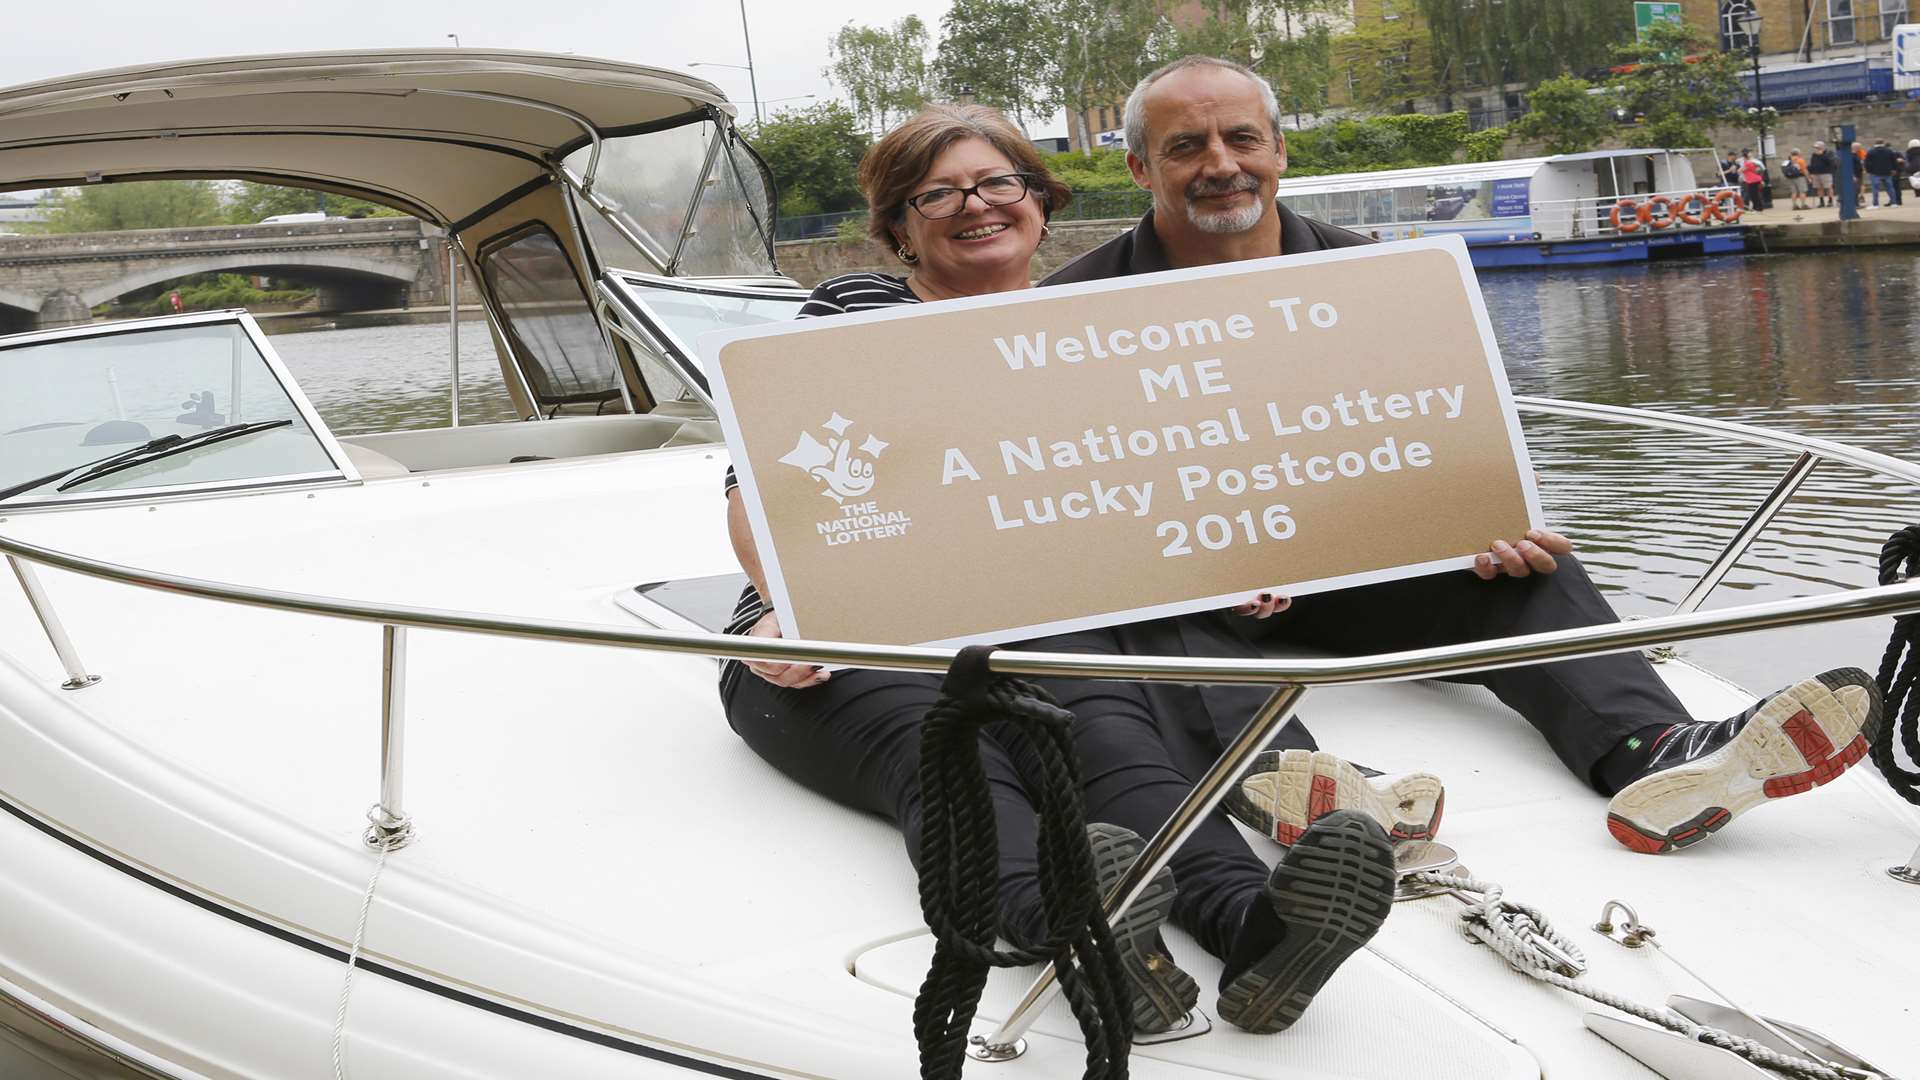 Lottery winners Wayne and Desirée Home moored on the River Medway in Maidstone